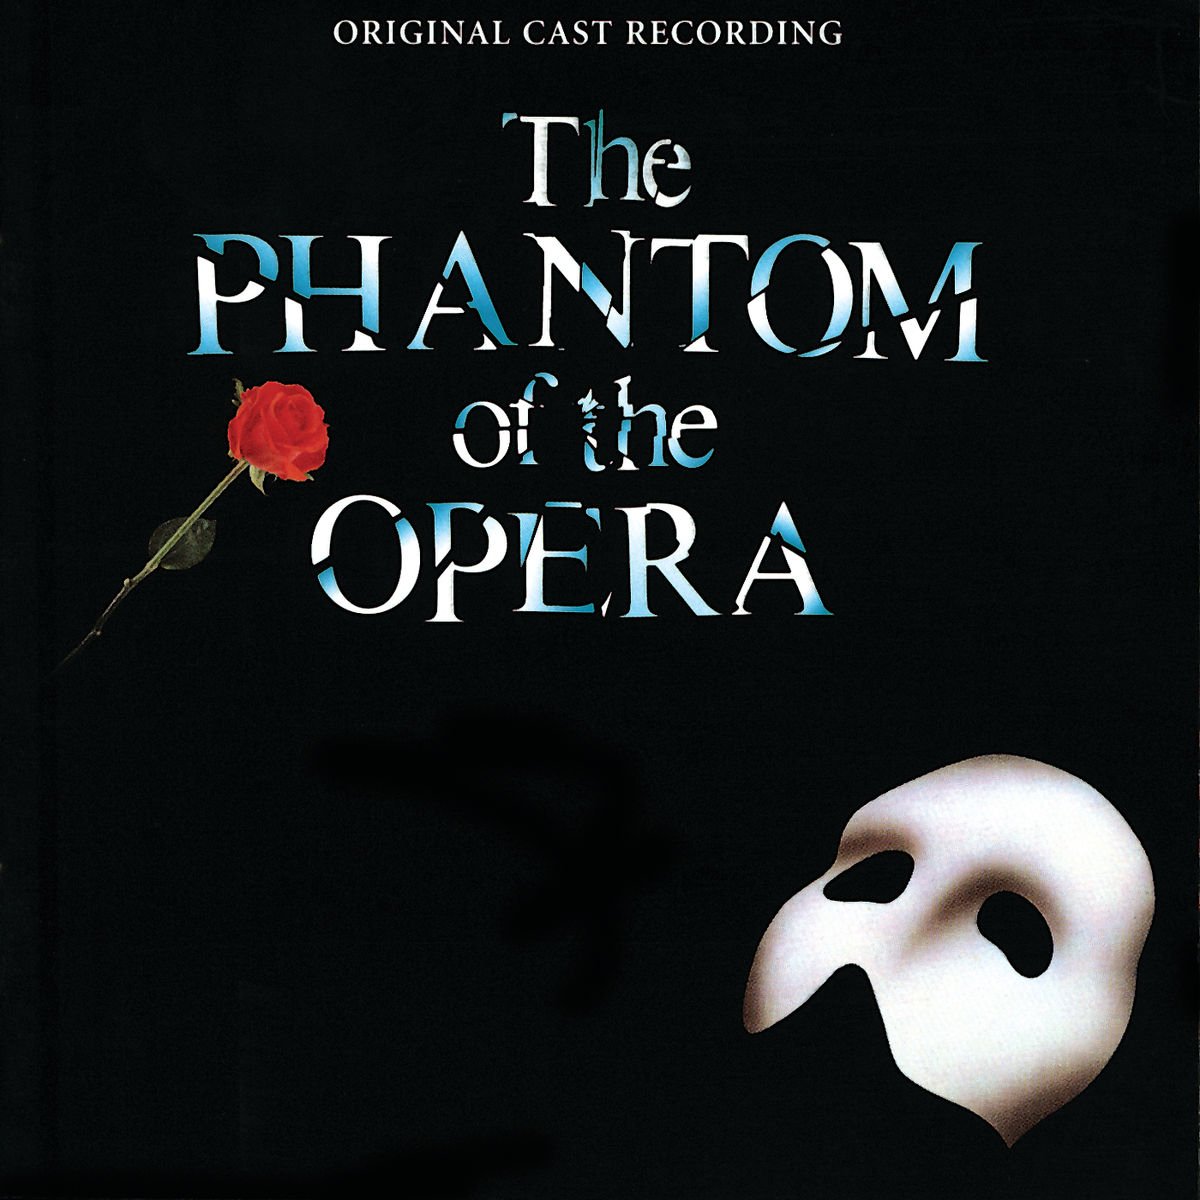 top 3 from the phantom of the opera